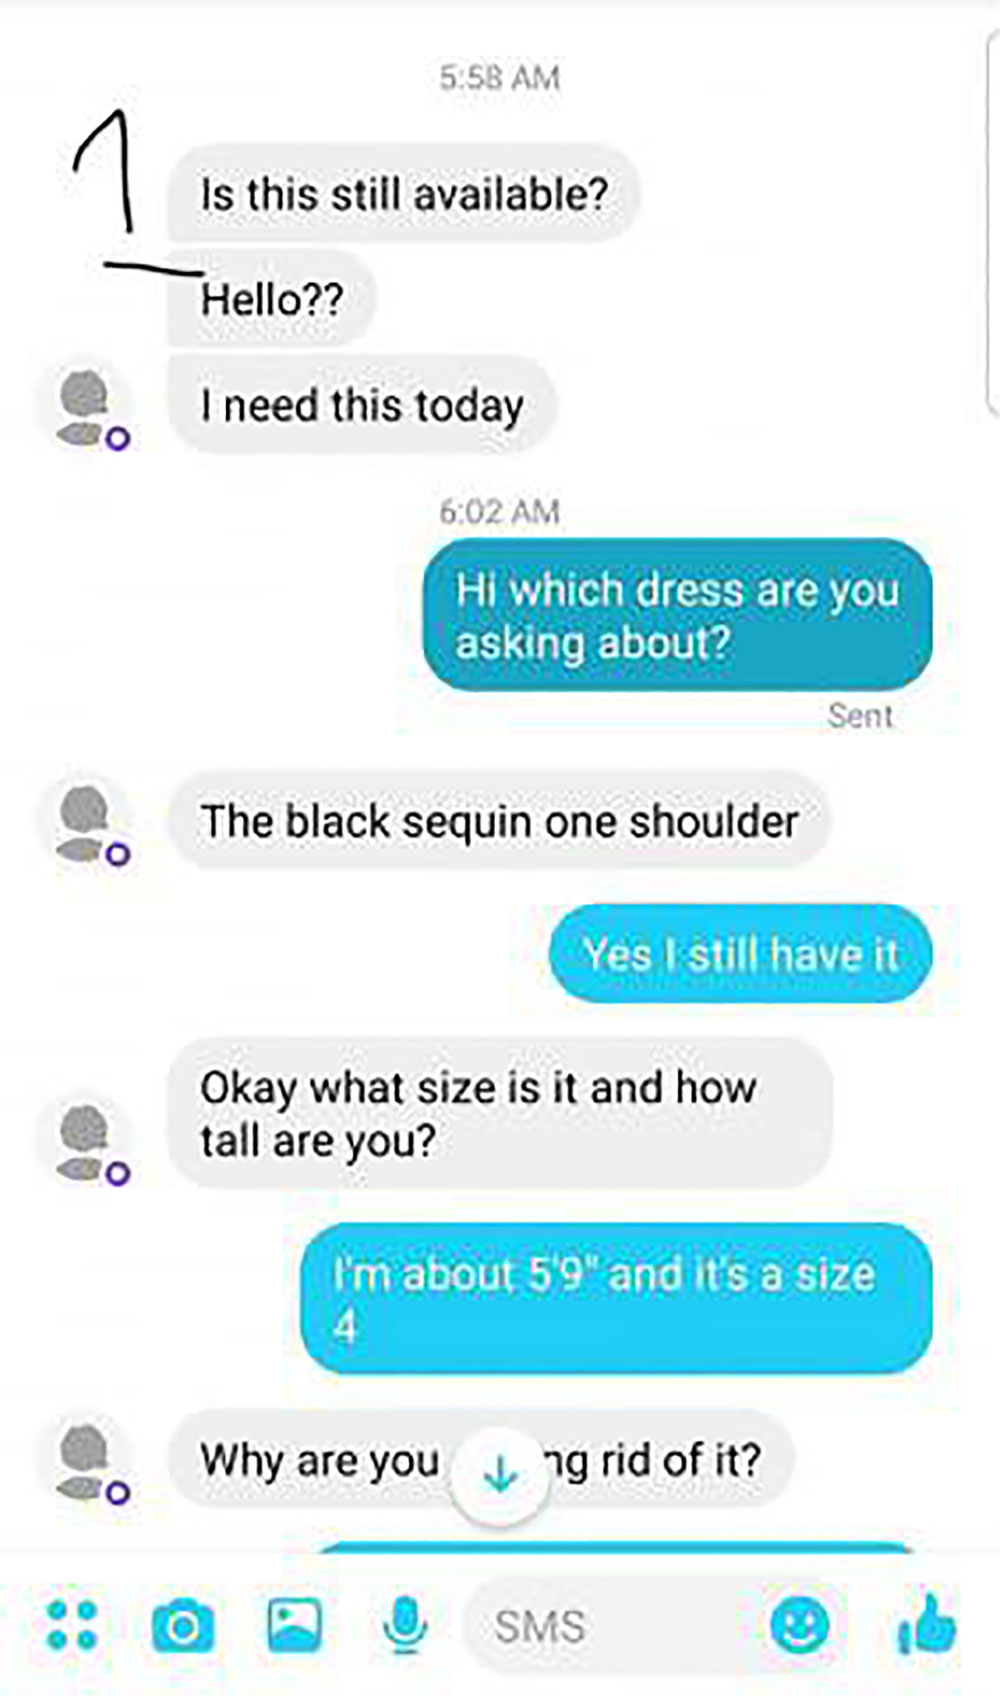 number - Is this still available? Hello?? I need this today Hi which dress are you asking about? Sent The black sequin one shoulder Yes I still have it Okay what size is it and how tall are you? I'm about 5'9" and it's a size Why are young rid of it? O Sm